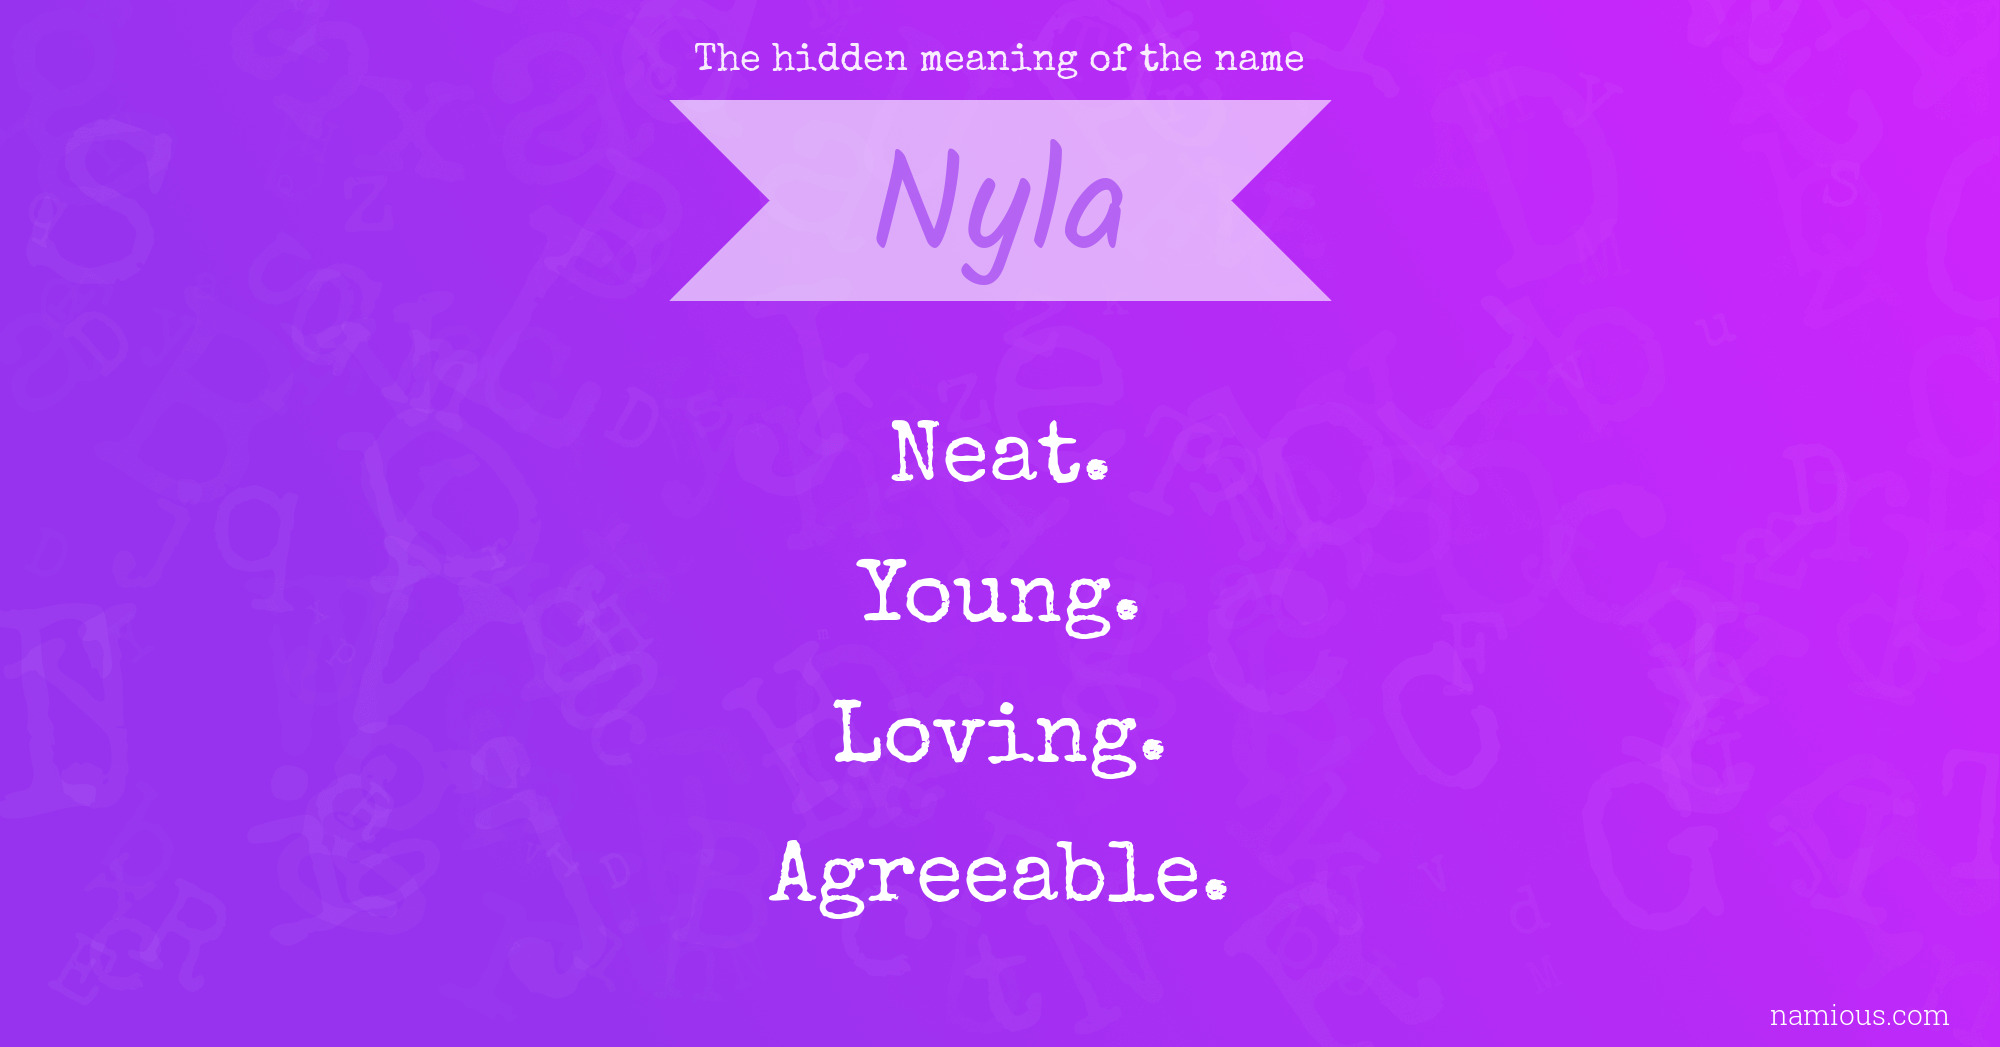 The hidden meaning of the name Nyla